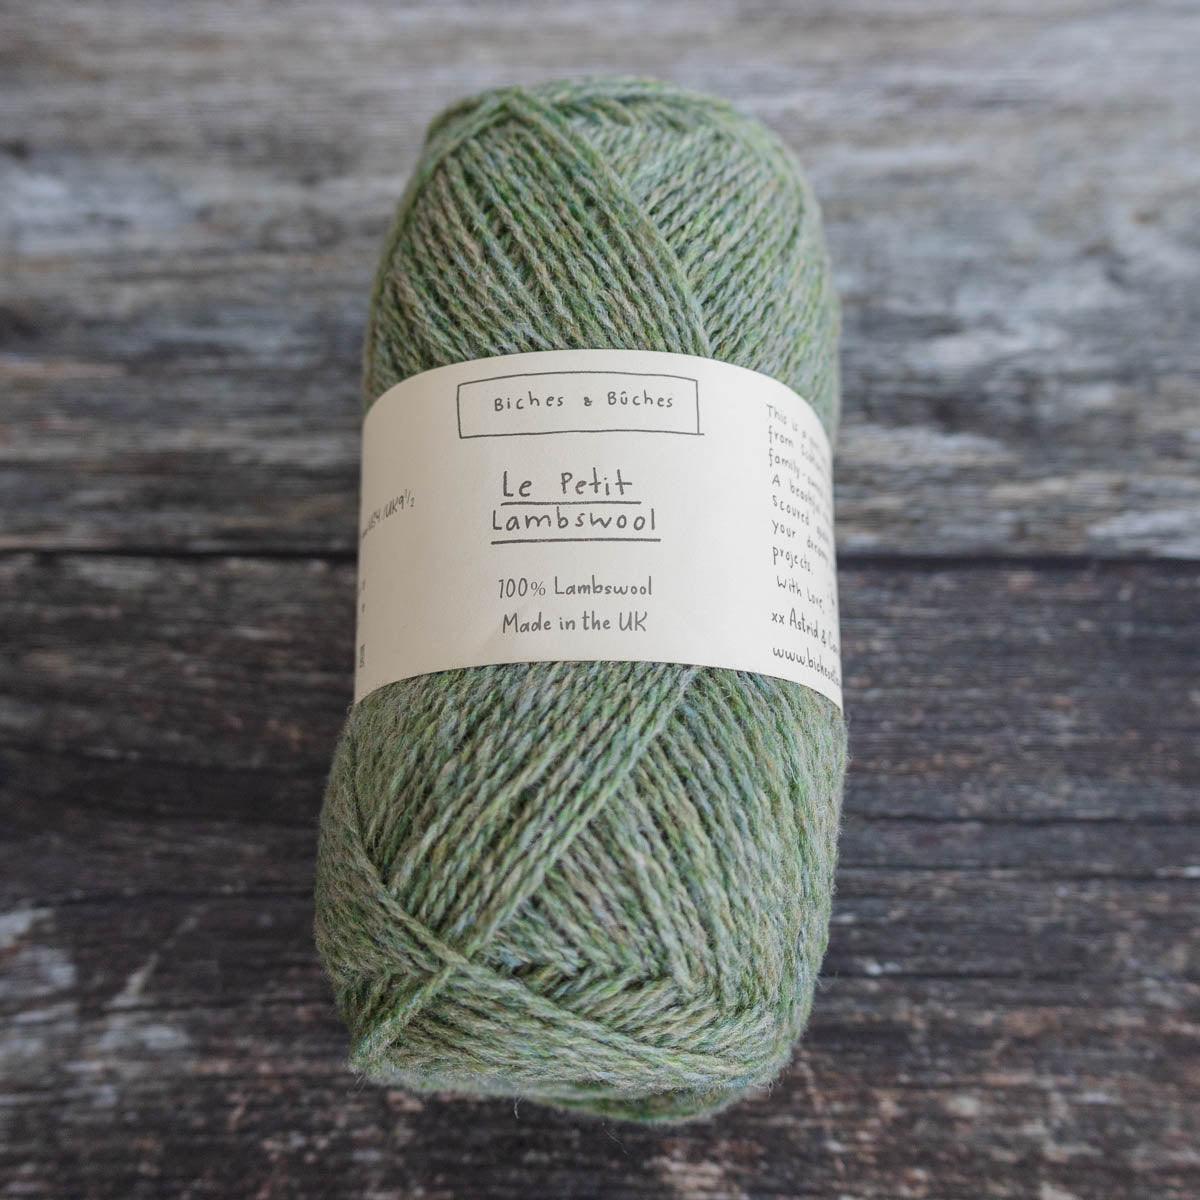 Biches & Bûches Biches & Bûches Le Petit Lambswool - Soft Green - 4ply Knitting Yarn